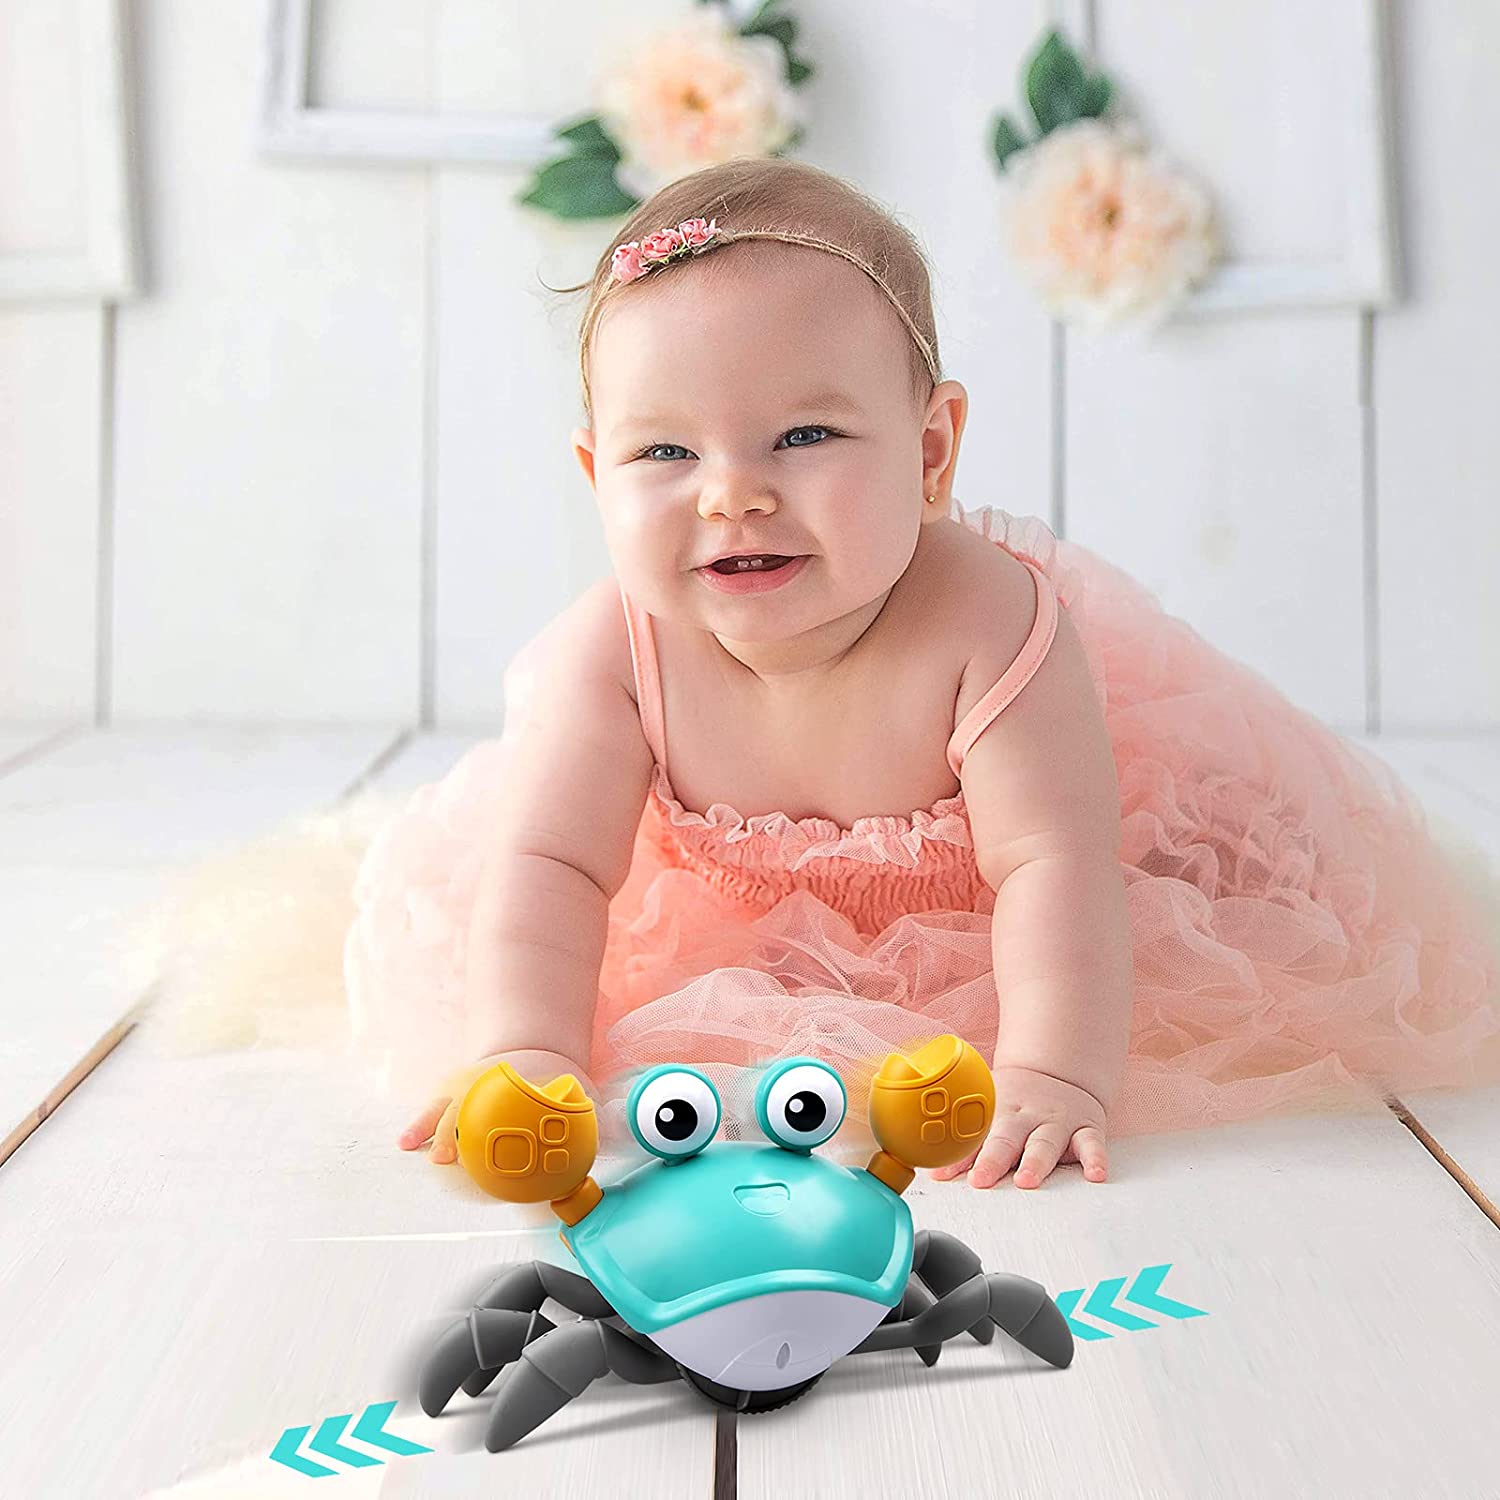 crawling crab helps with tummy timegsmzj